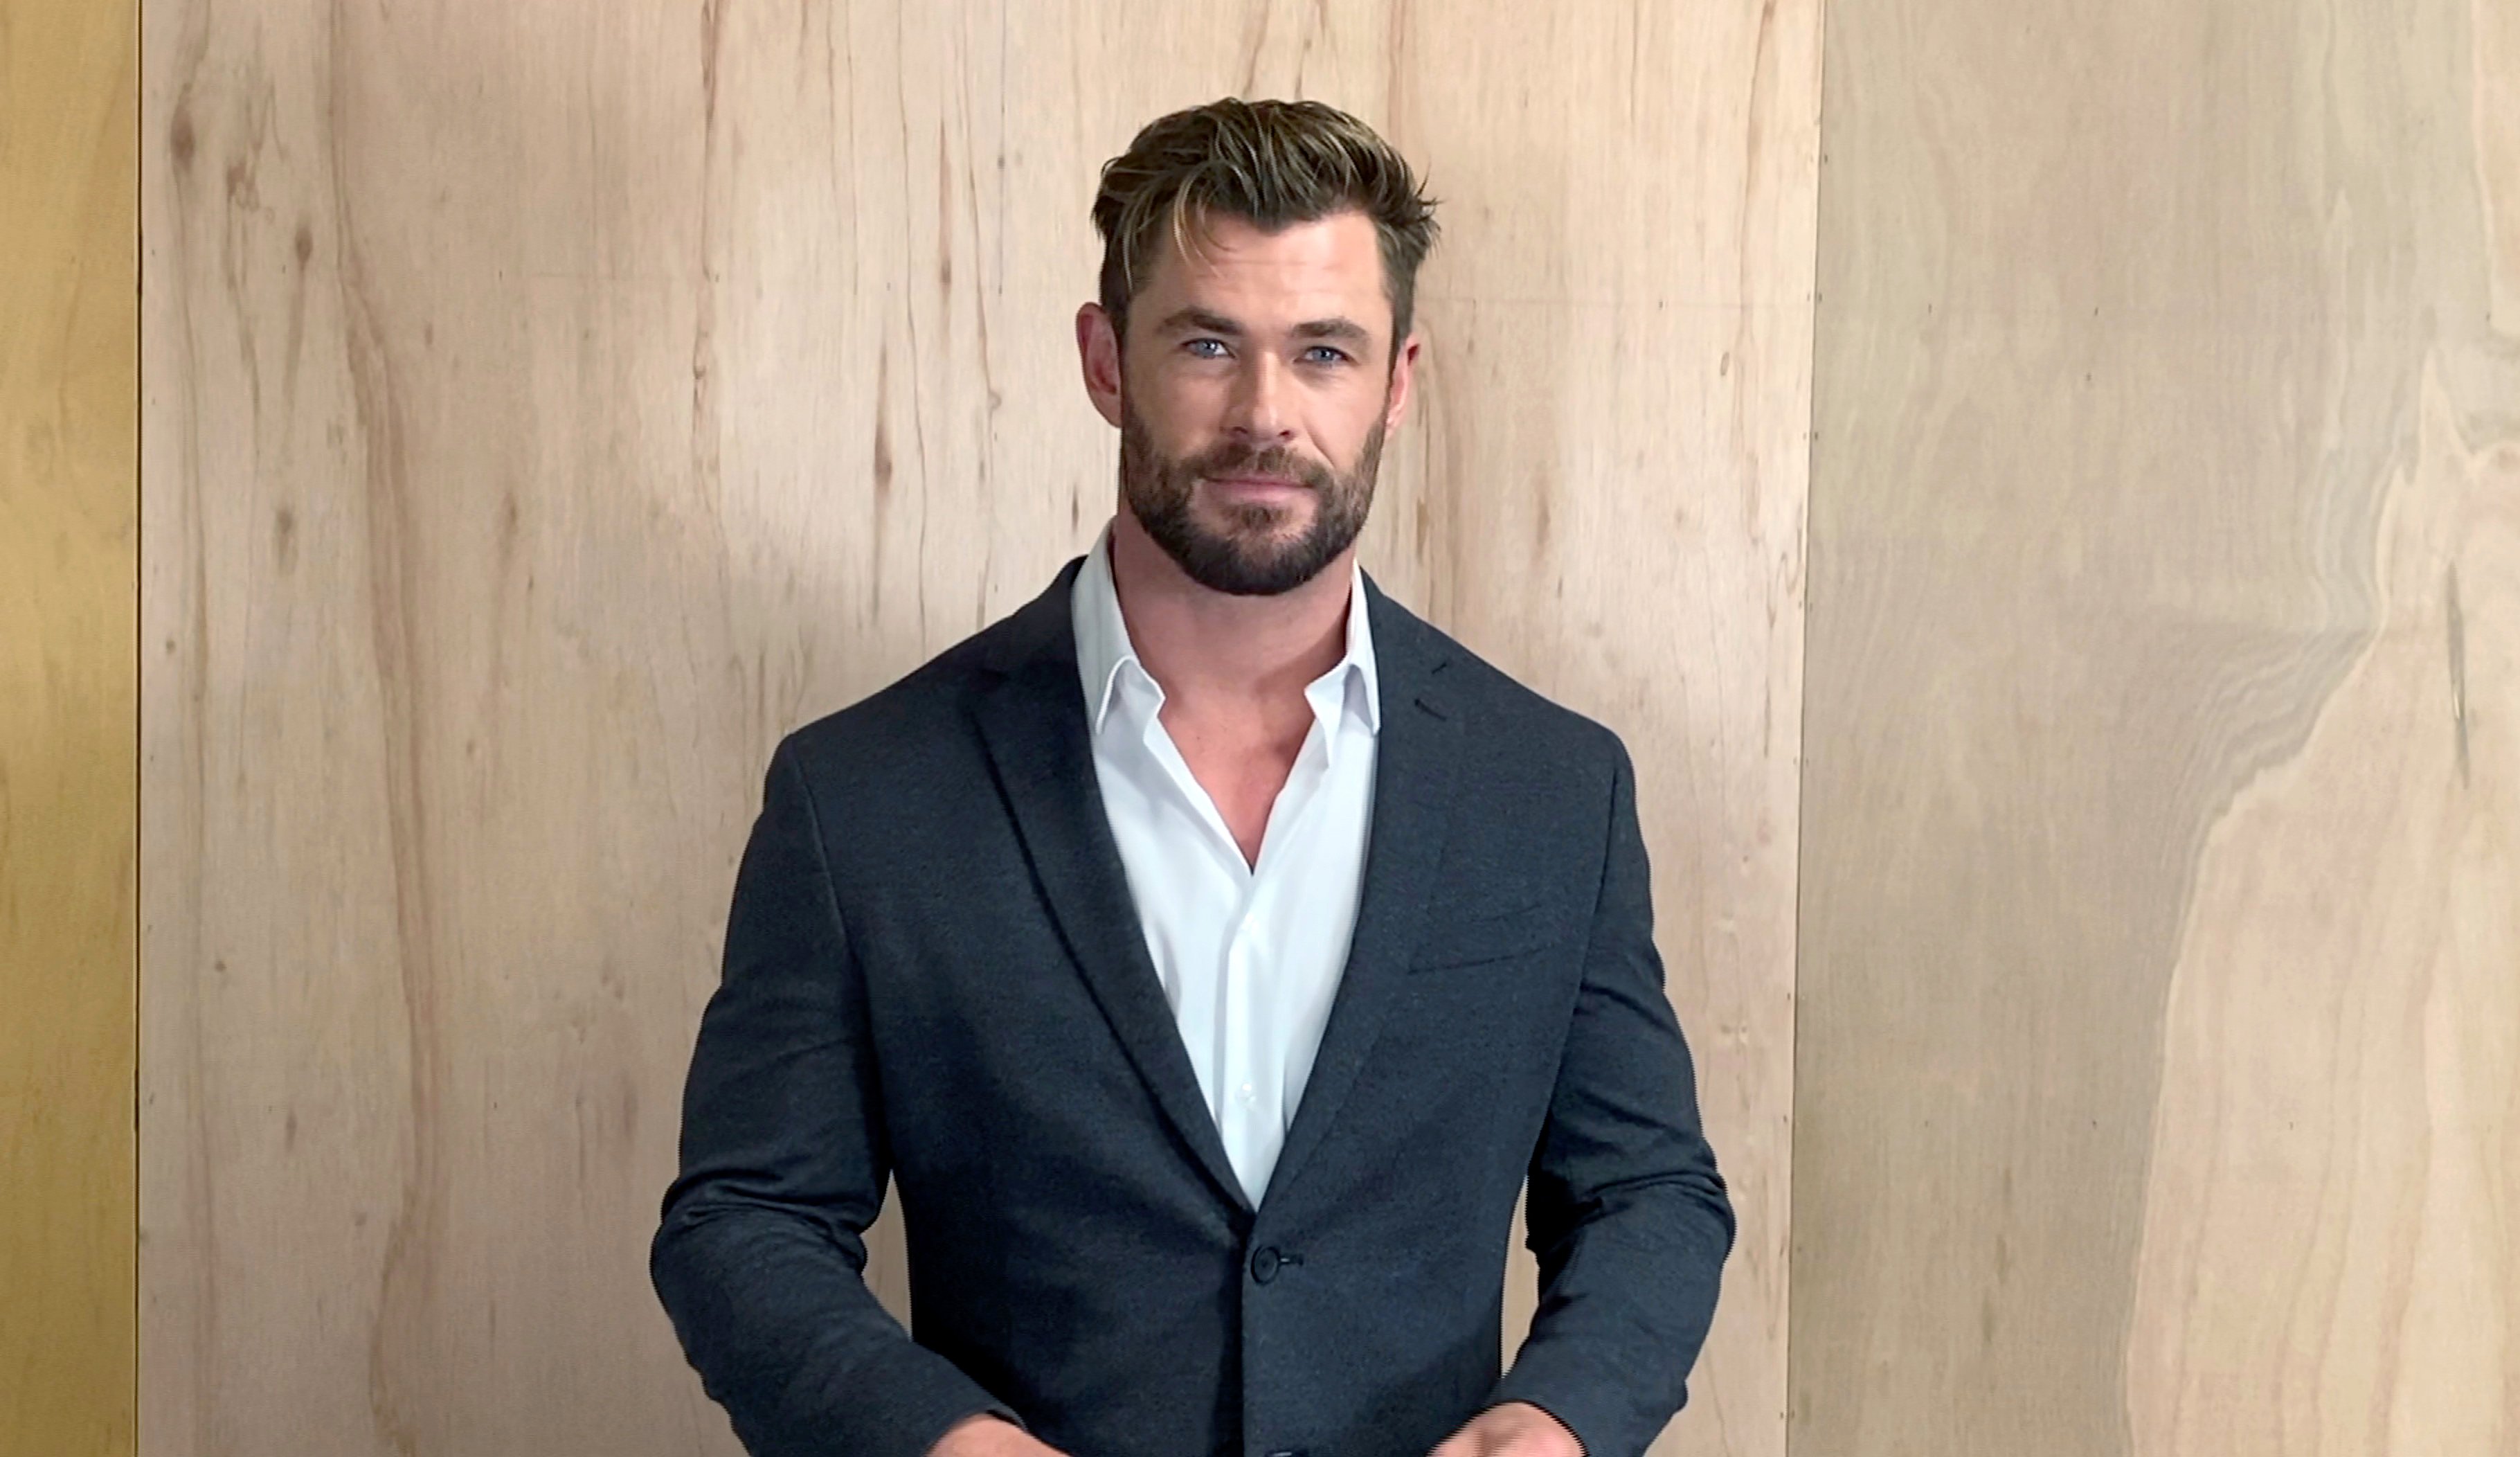 Chris Hemsworth smiles while posing in a shirt and suit jacket.